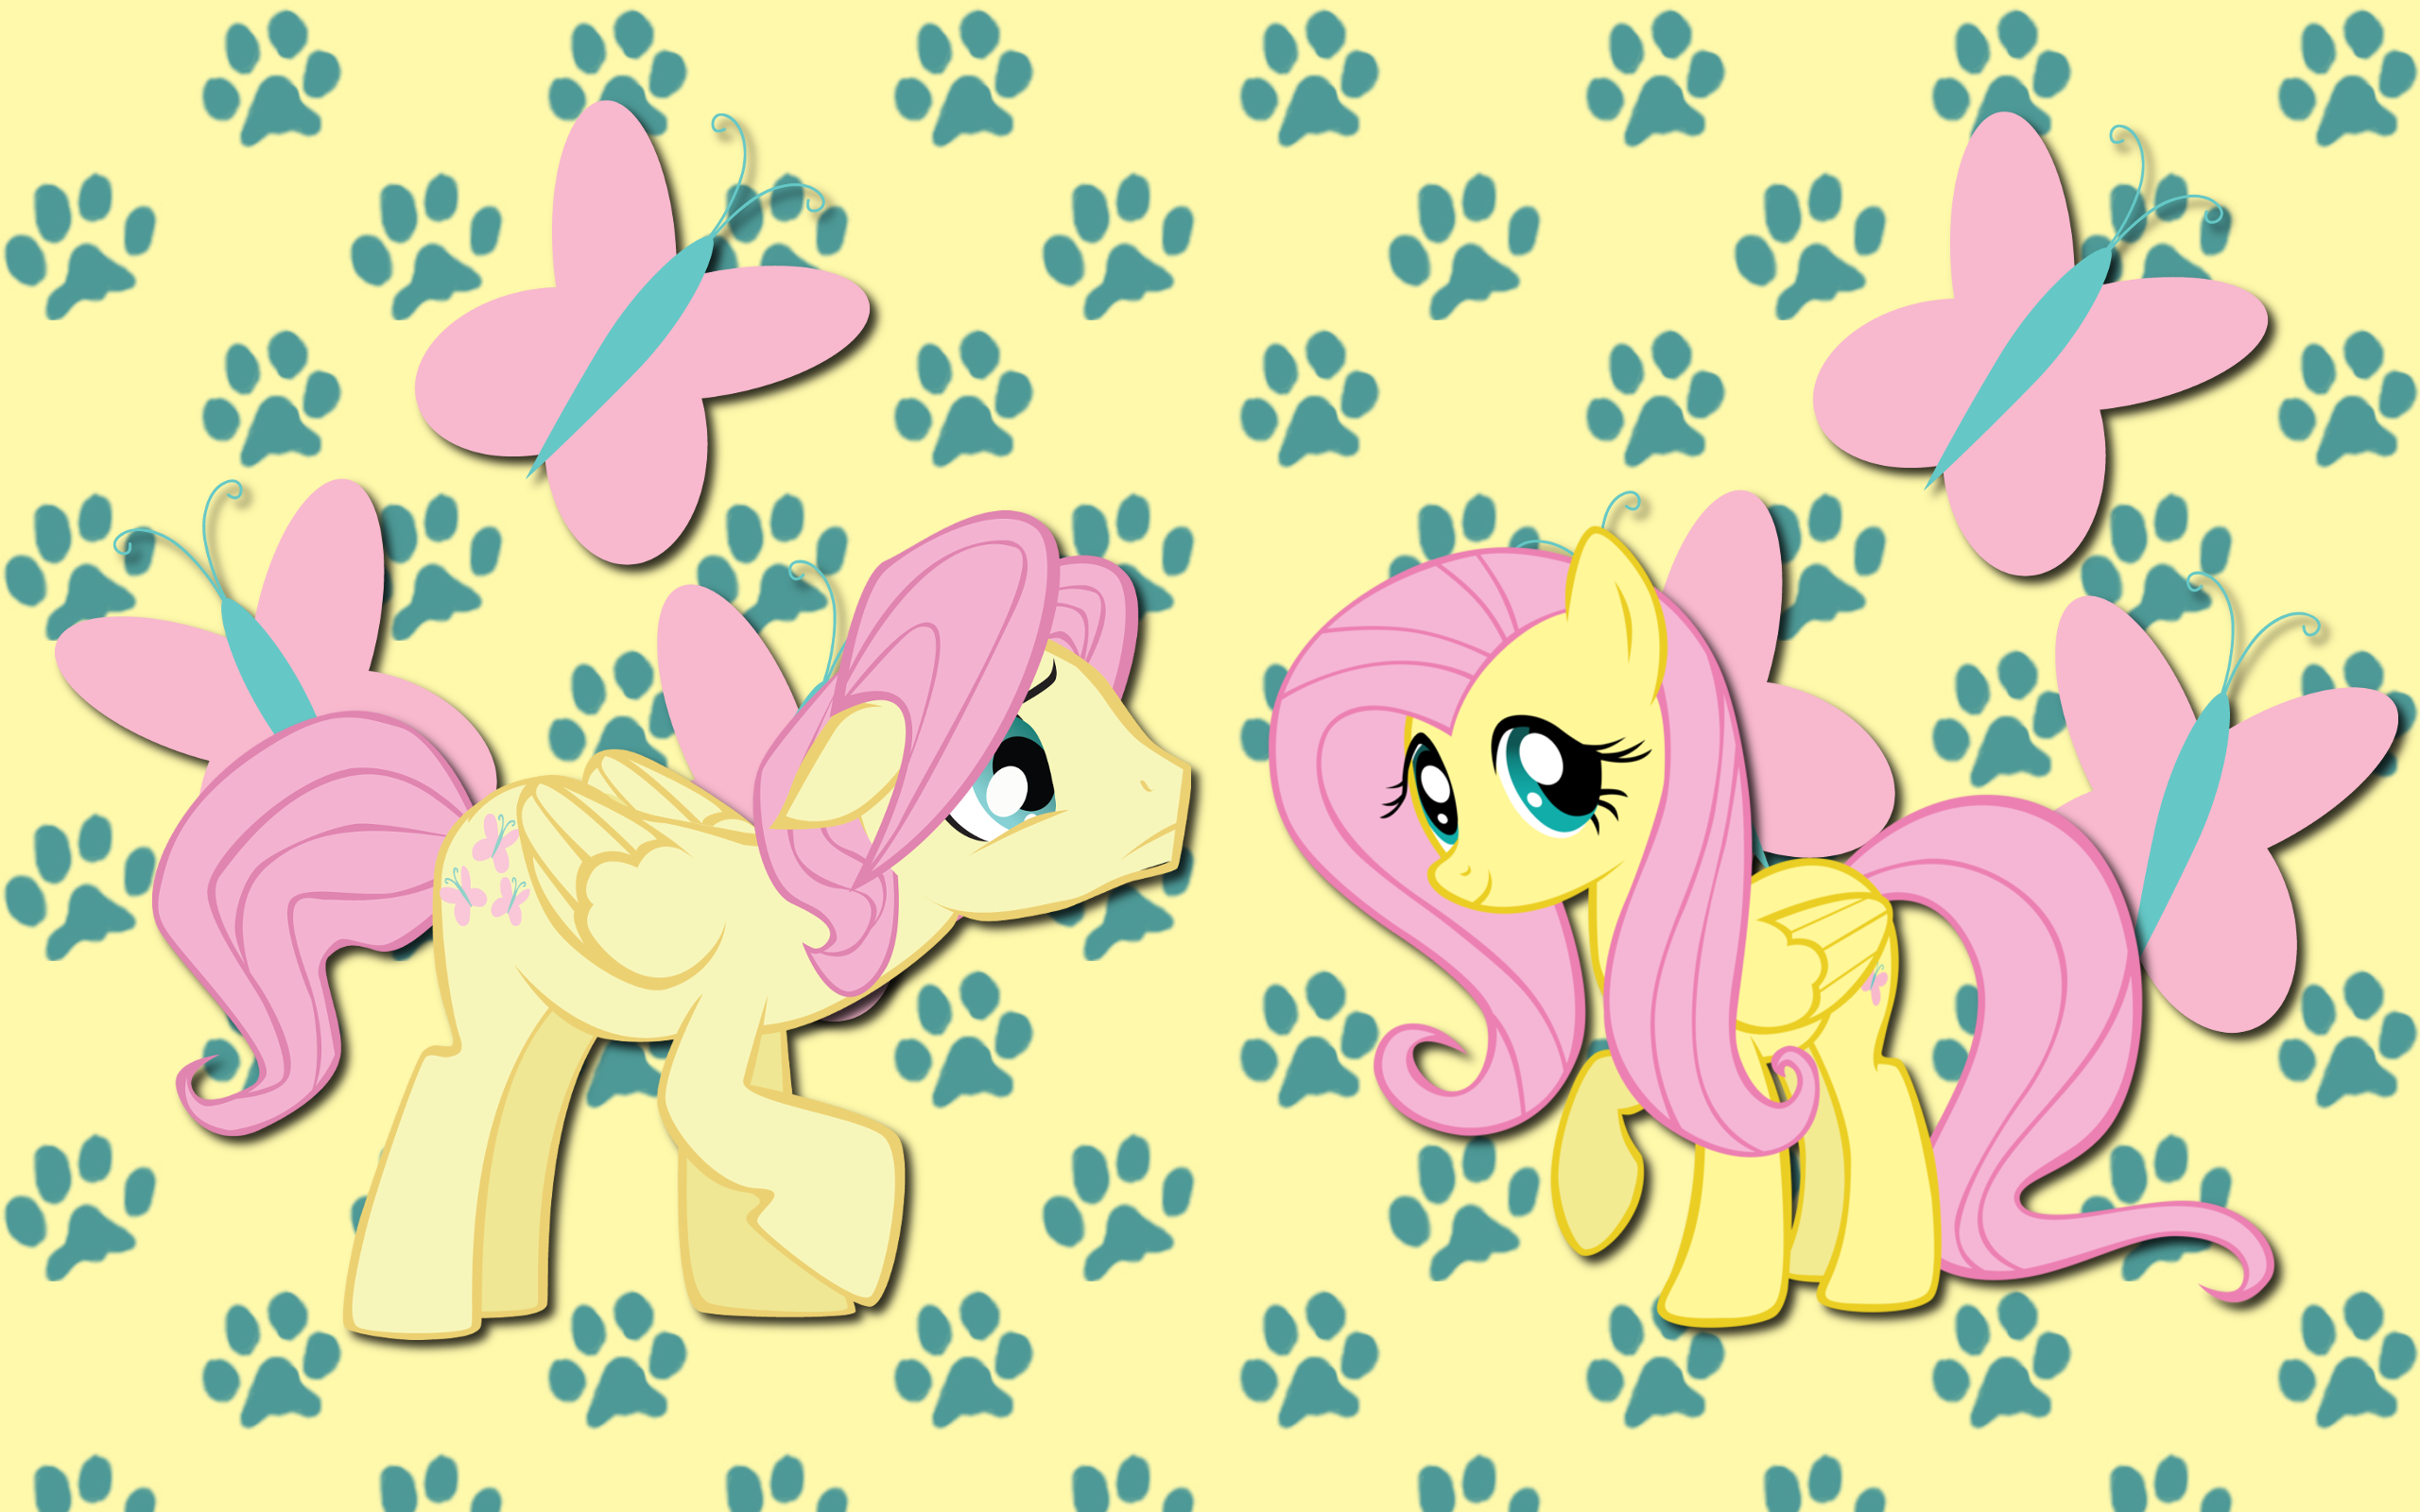 Butterscotch and Fluttershy WP by AliceHumanSacrifice0, ooklah, Takua770 and Trotsworth